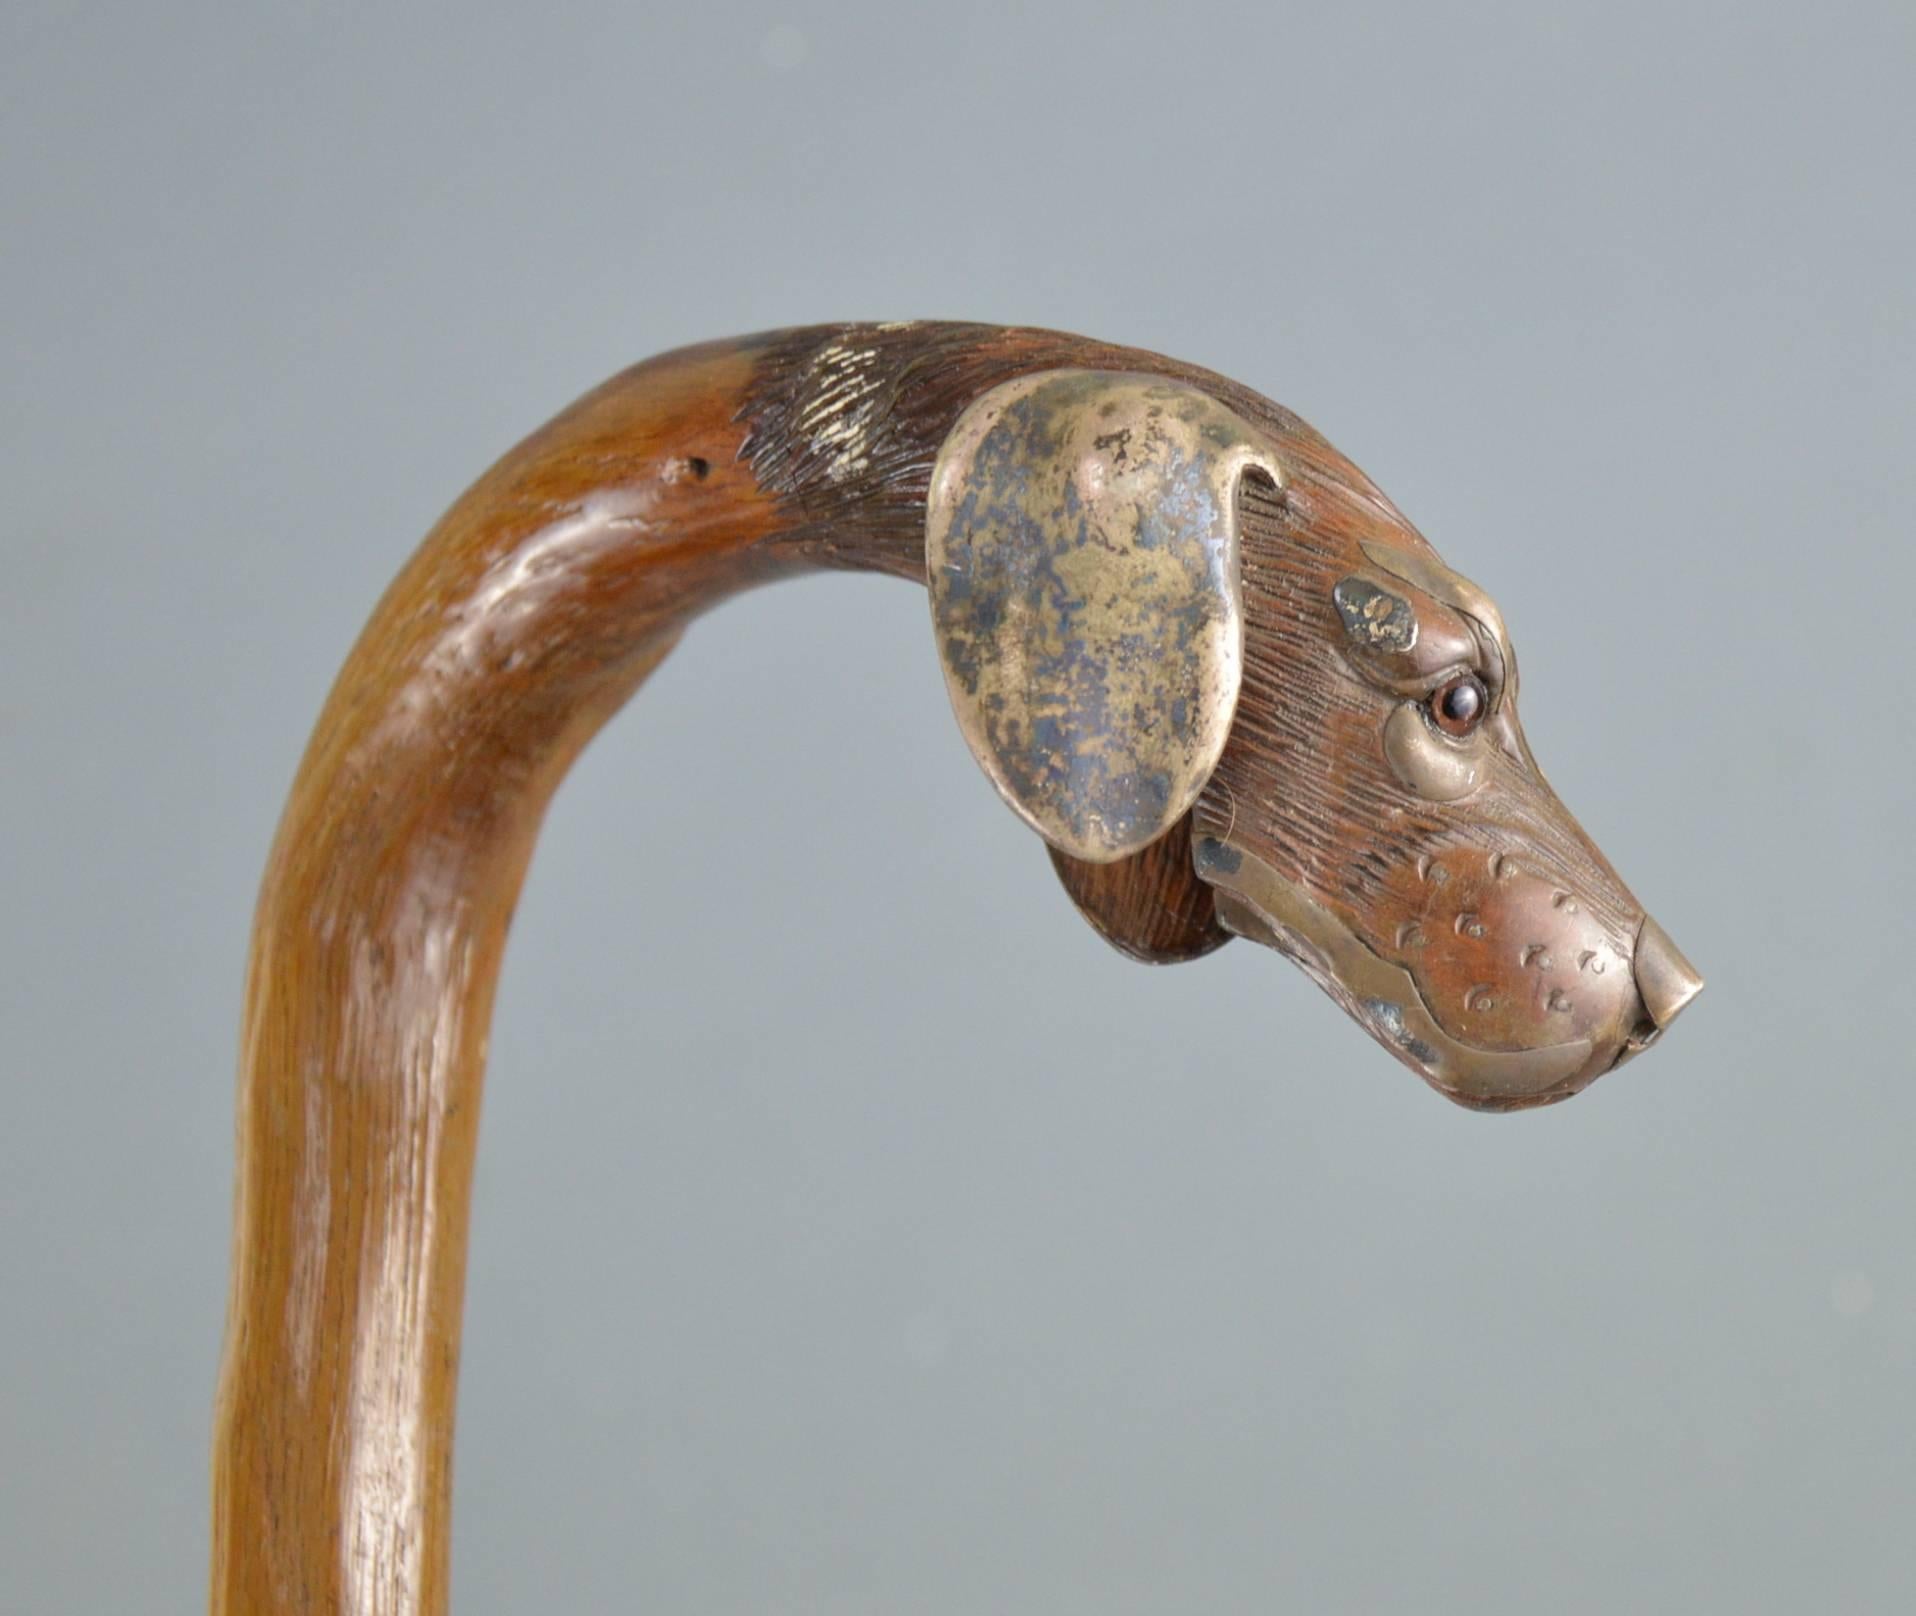 Antique copper-mounted carved wooden dogs head walking stick, circa 1900.